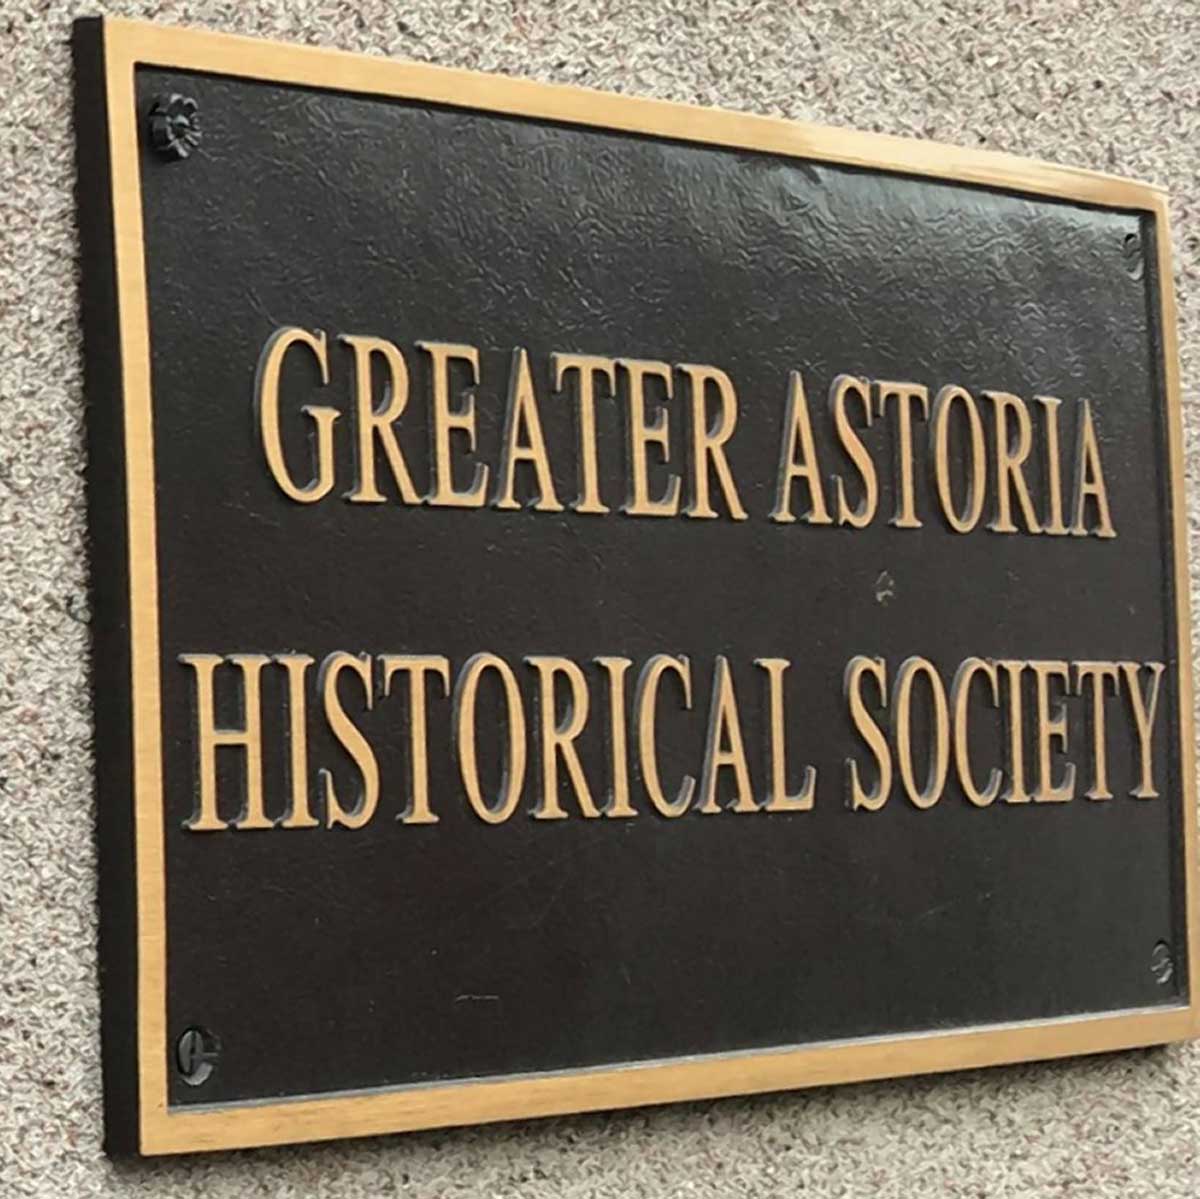 Greater Astoria Historical Society launches $20,000 campaign to move to new space